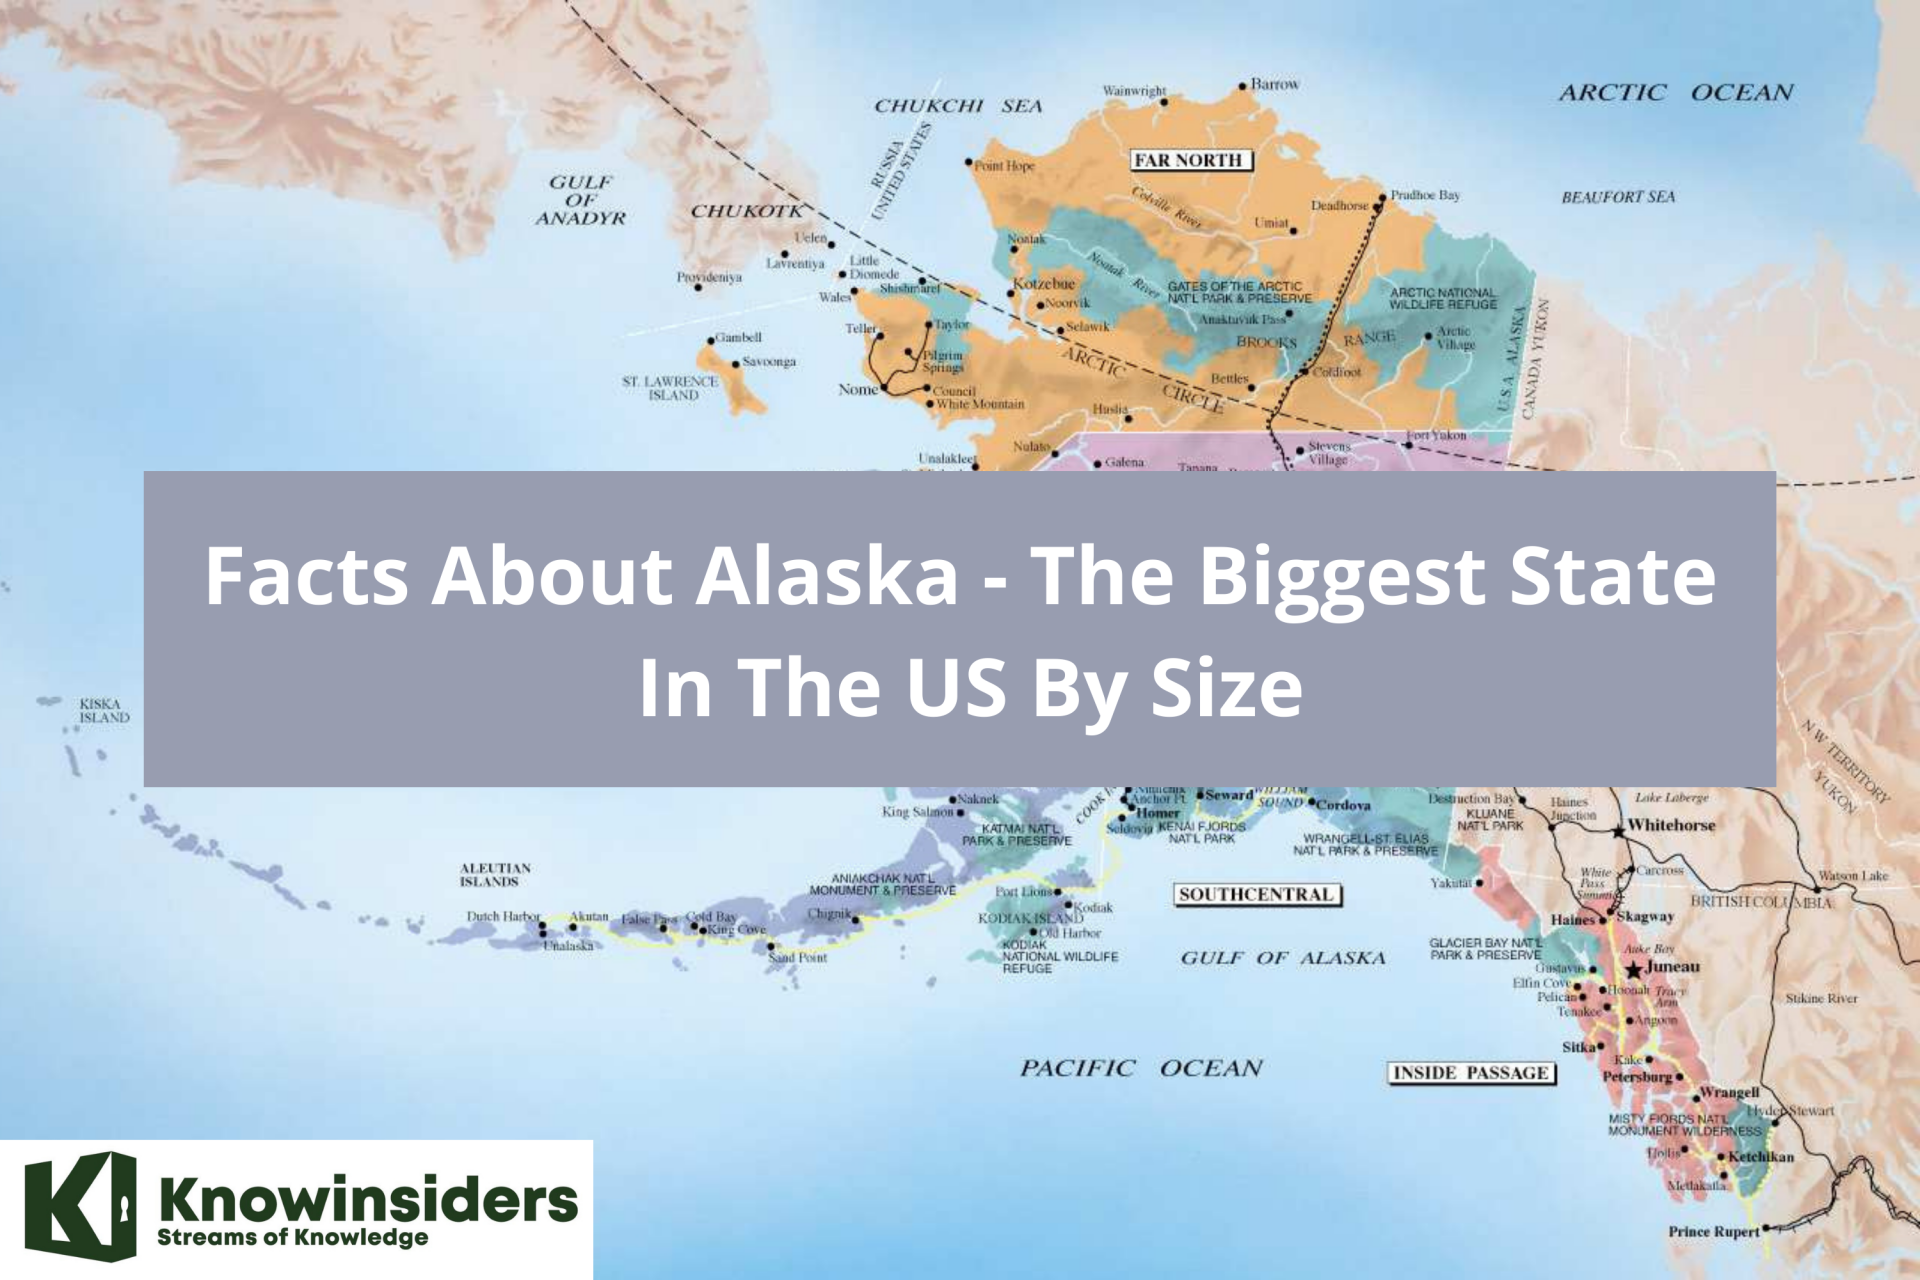 Facts About Alaska - The Biggest State In The US